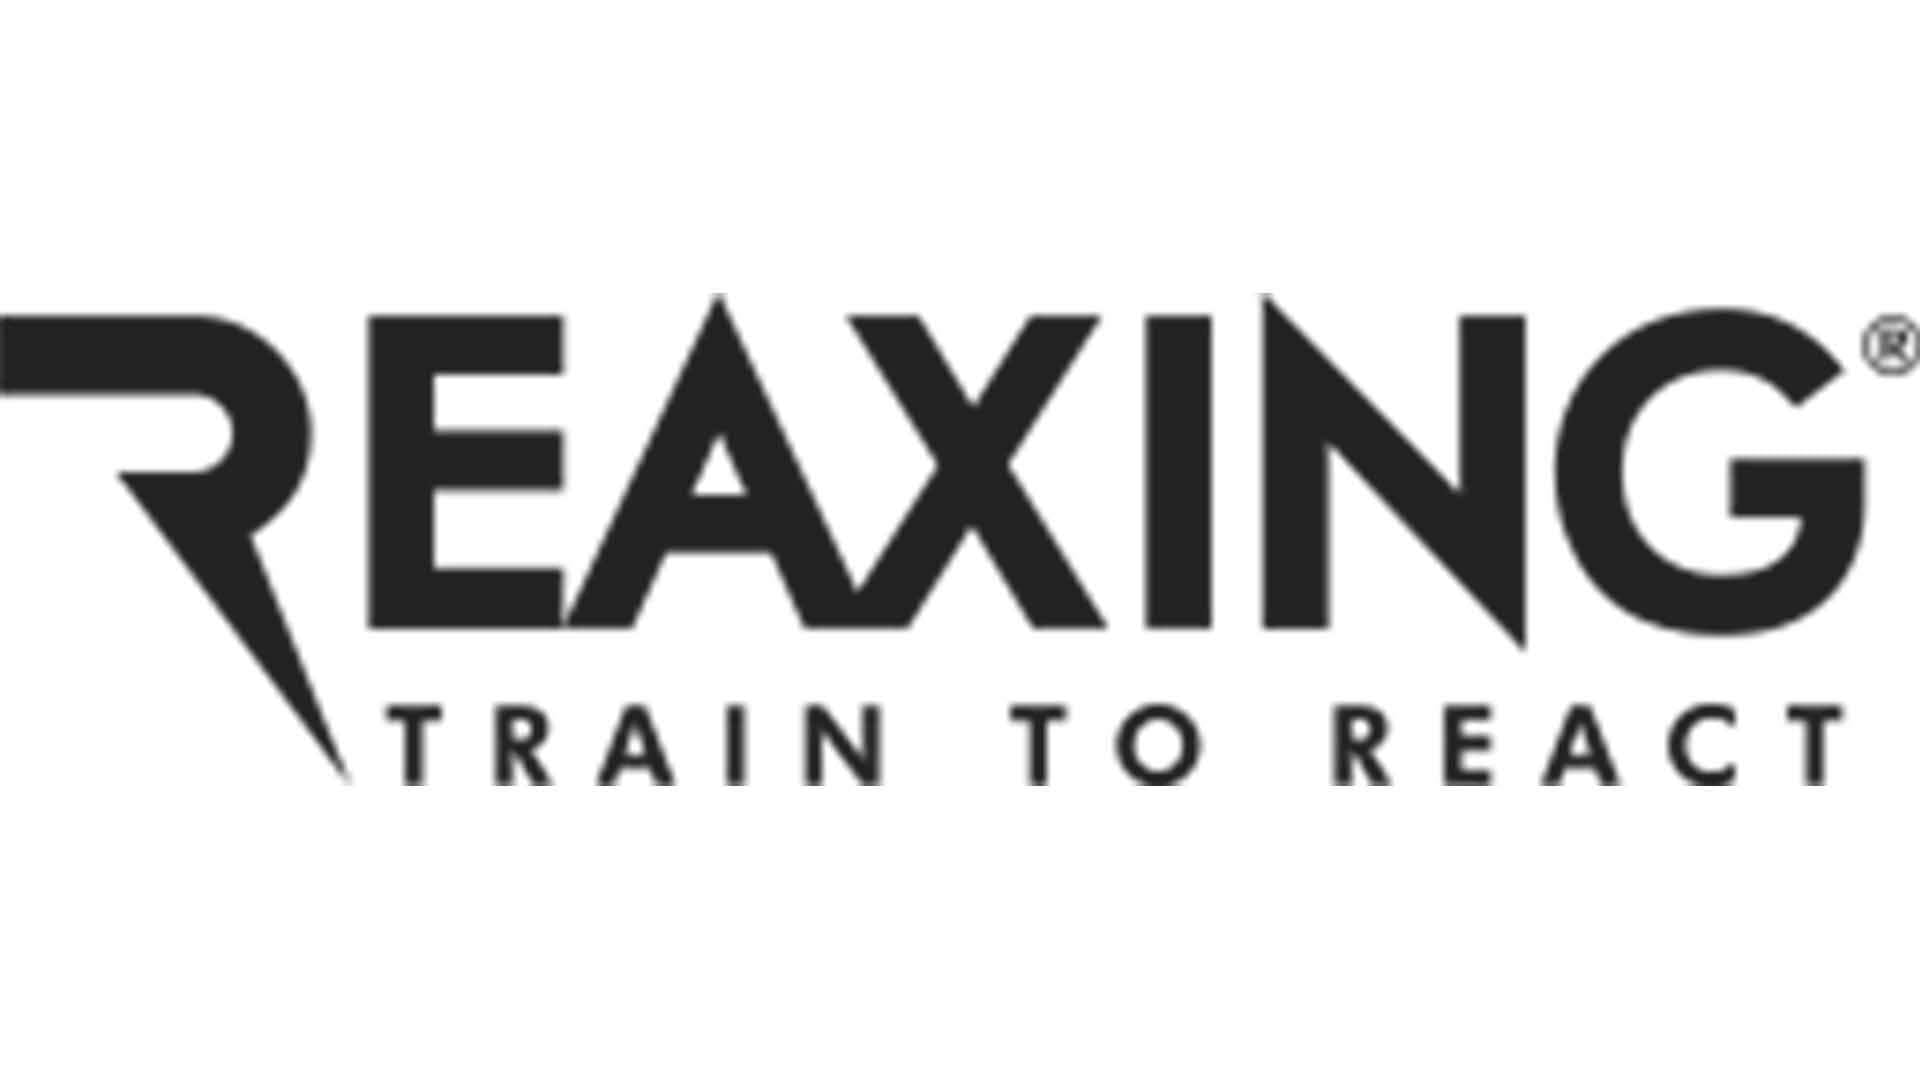 A black and white logo of eaxing